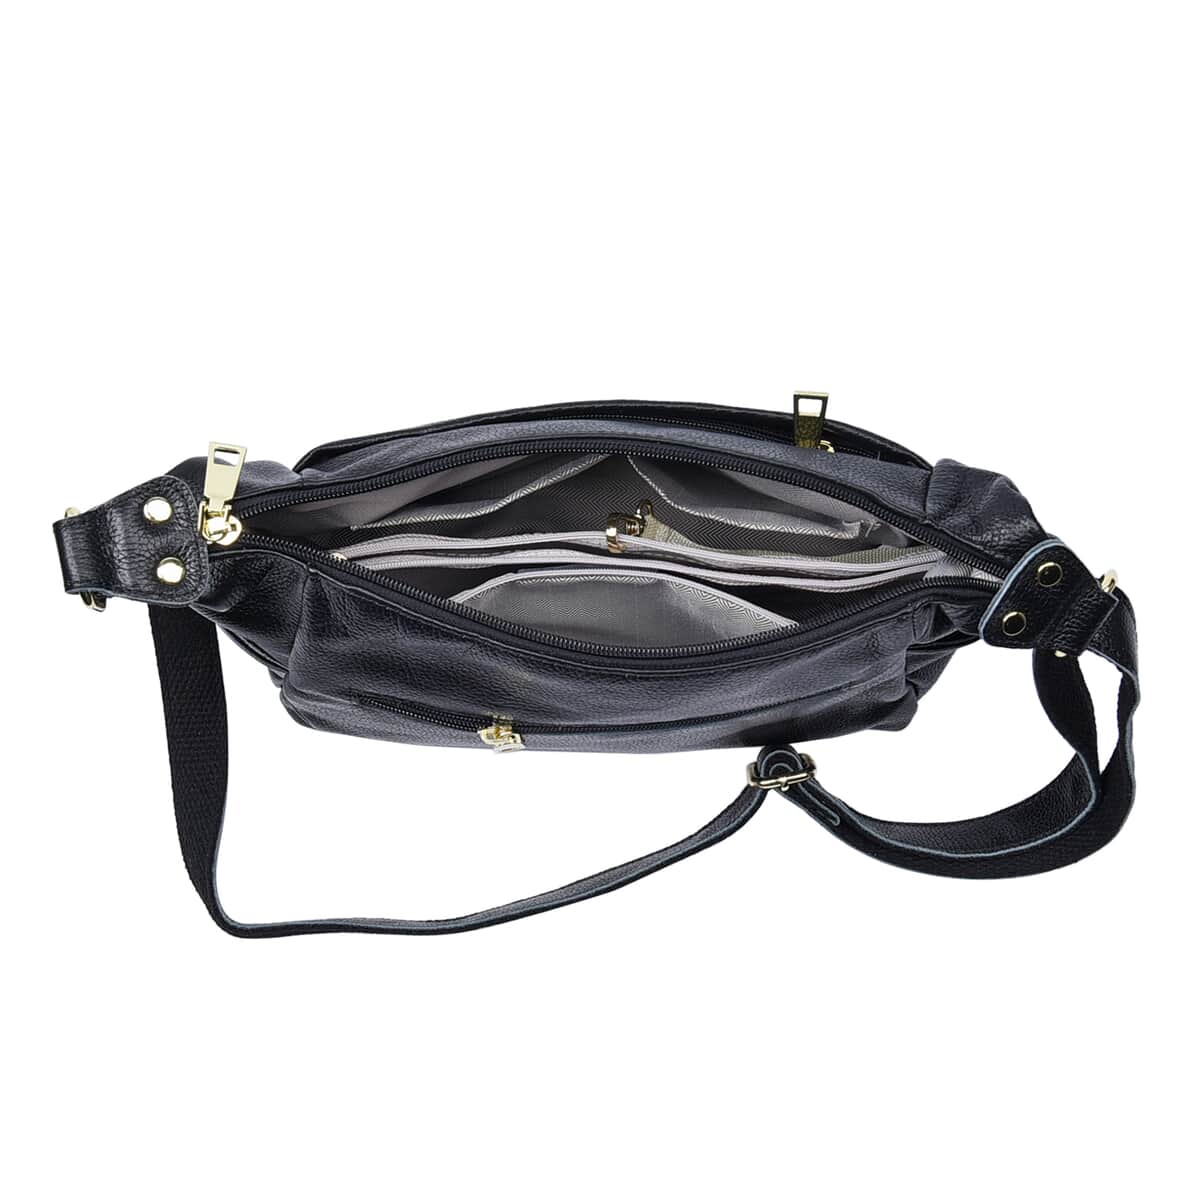 PASSAGE Black Genuine Leather Crossbody Bag (11.41"x3.94"x8.24") with Multi Pockets & 46 Inches Adjustable Shoulder Strap image number 4